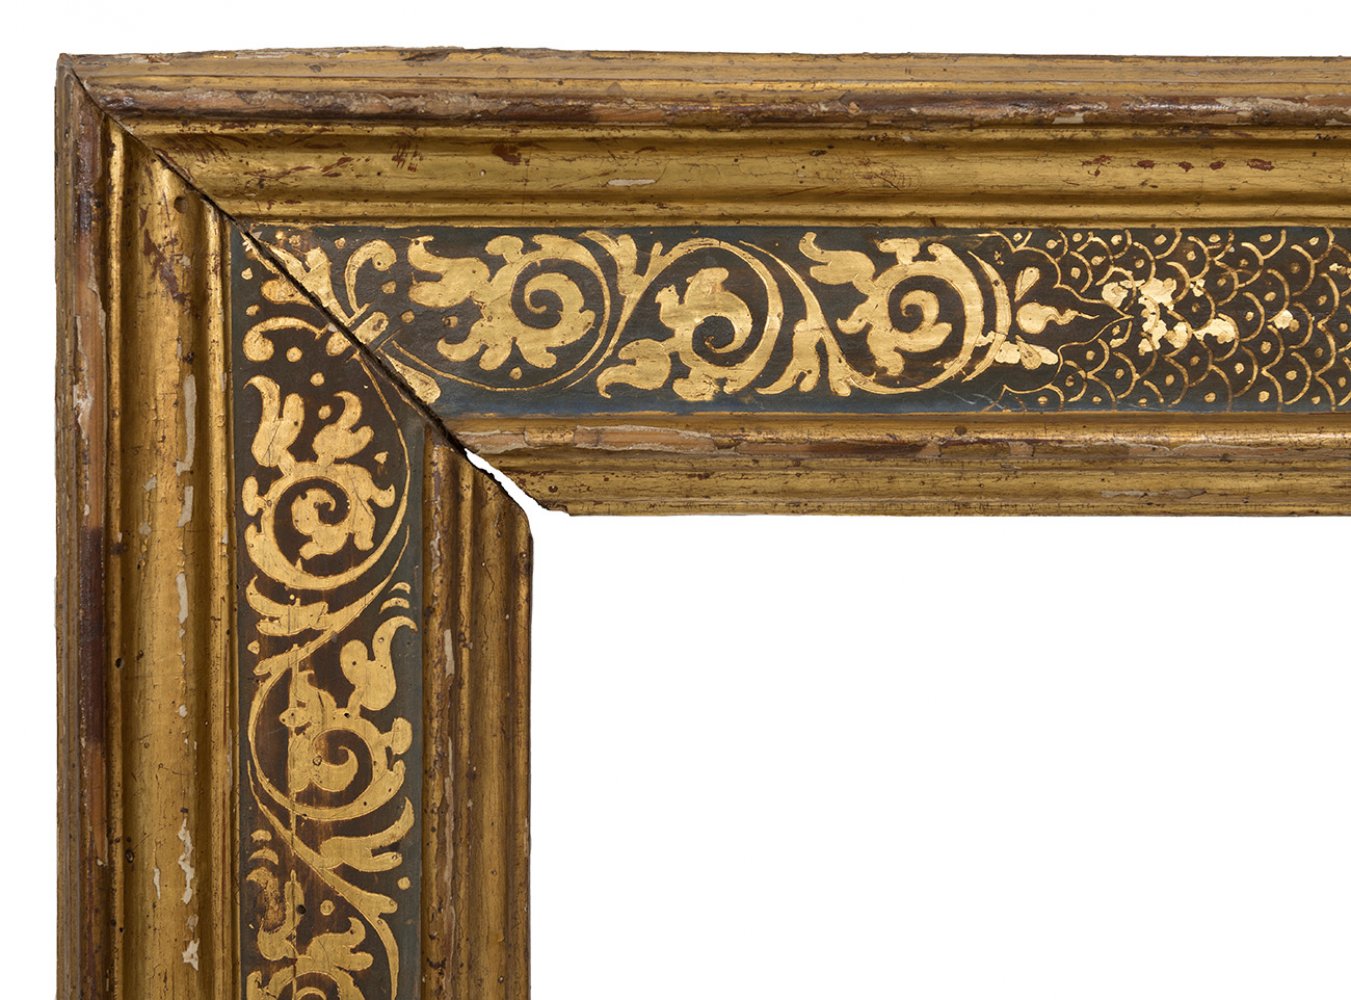 Frame; Italy, 16th century.Carved and stewed wood.Provenance: private collection conceived since the - Image 5 of 6